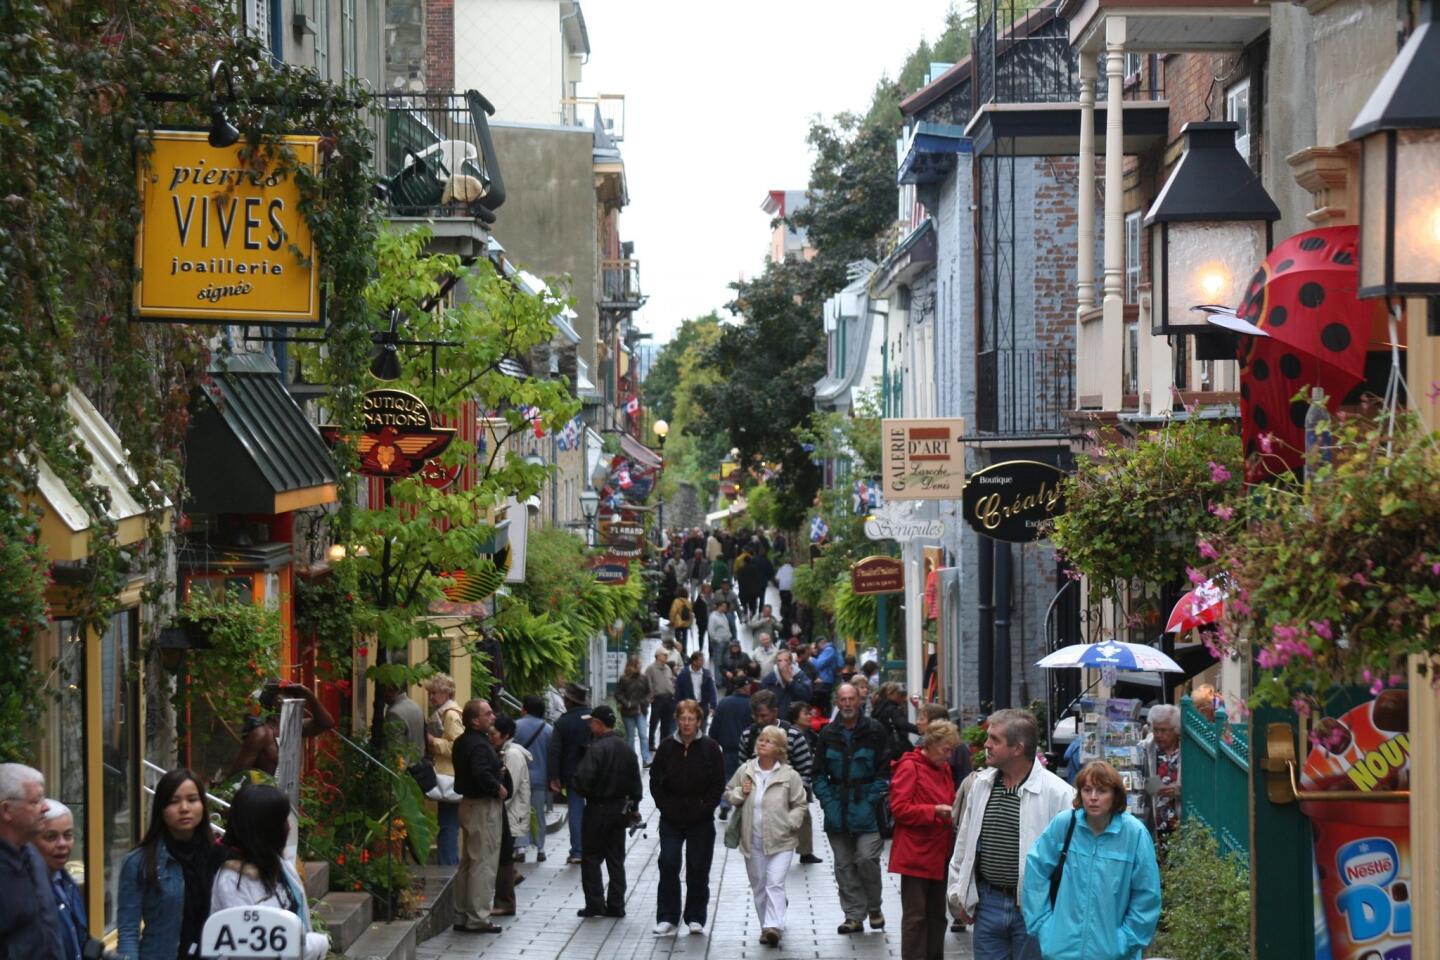 Quebec City visitors inevitably make their way to Rue du Petit-Champlain for its shops, galleries, restaurants and street entertainers.